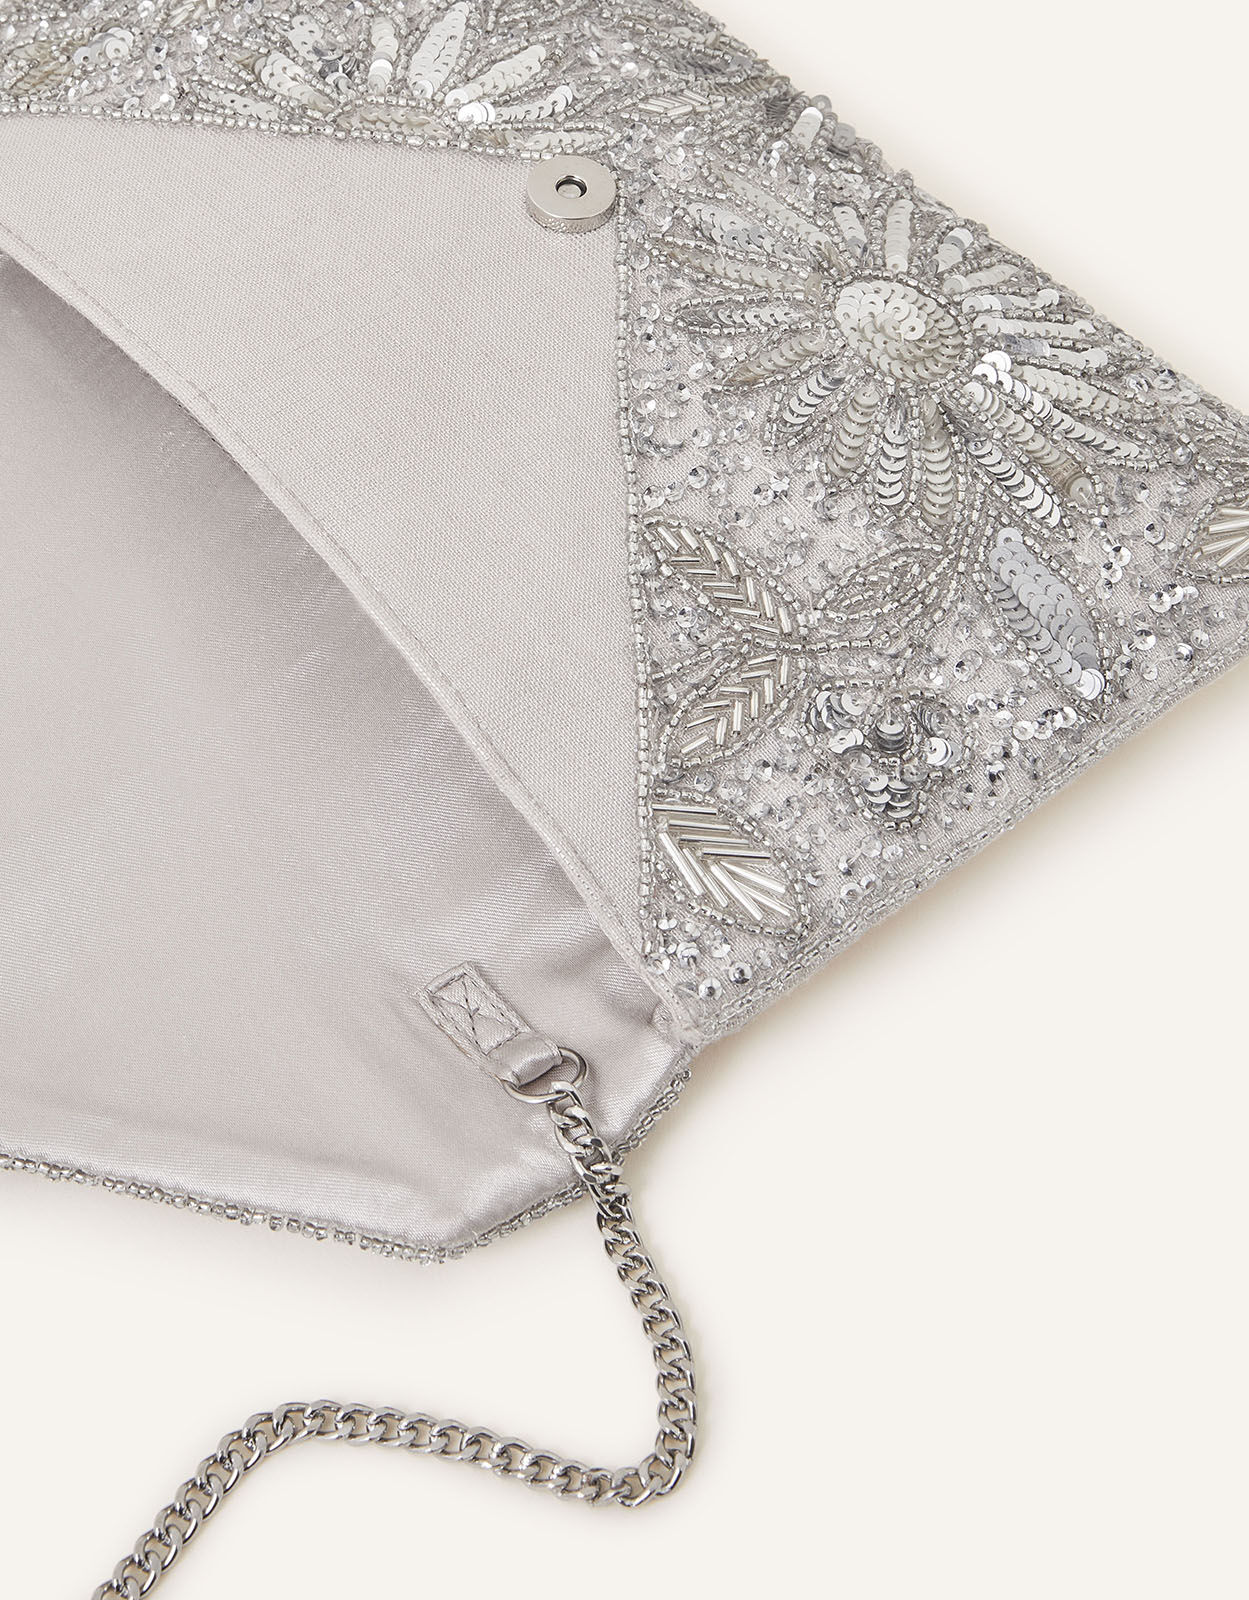 Embellished Classic Clutch Bag Silver | Black Friday | Accessorize 